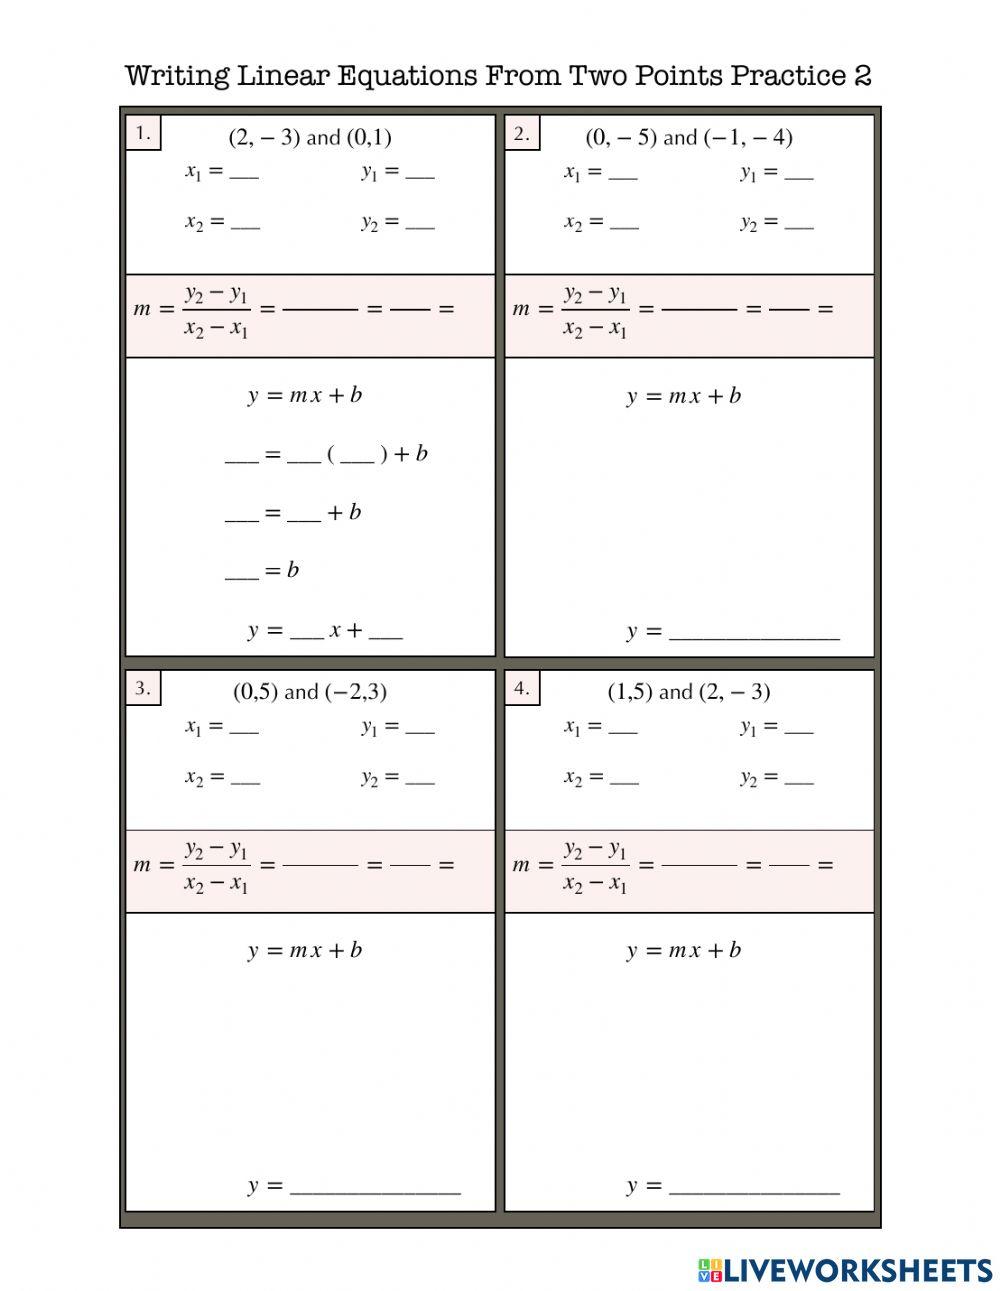 Writing Linear Equations From Two Points Practice 2